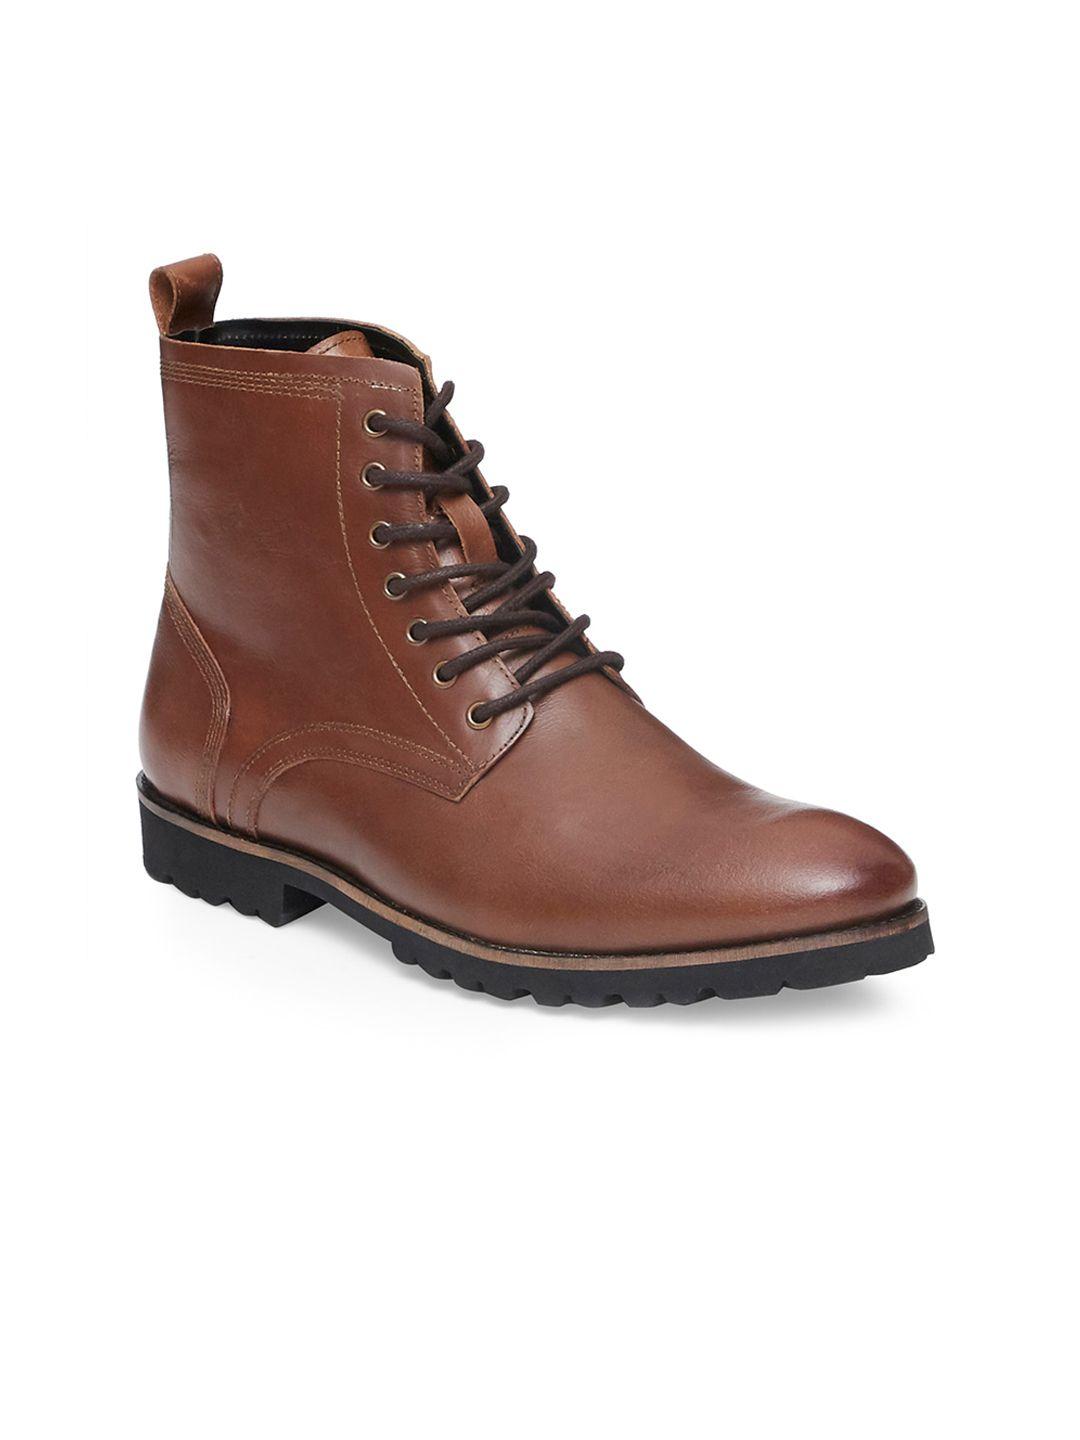 hats off accessories men brown solid high-top leather boots